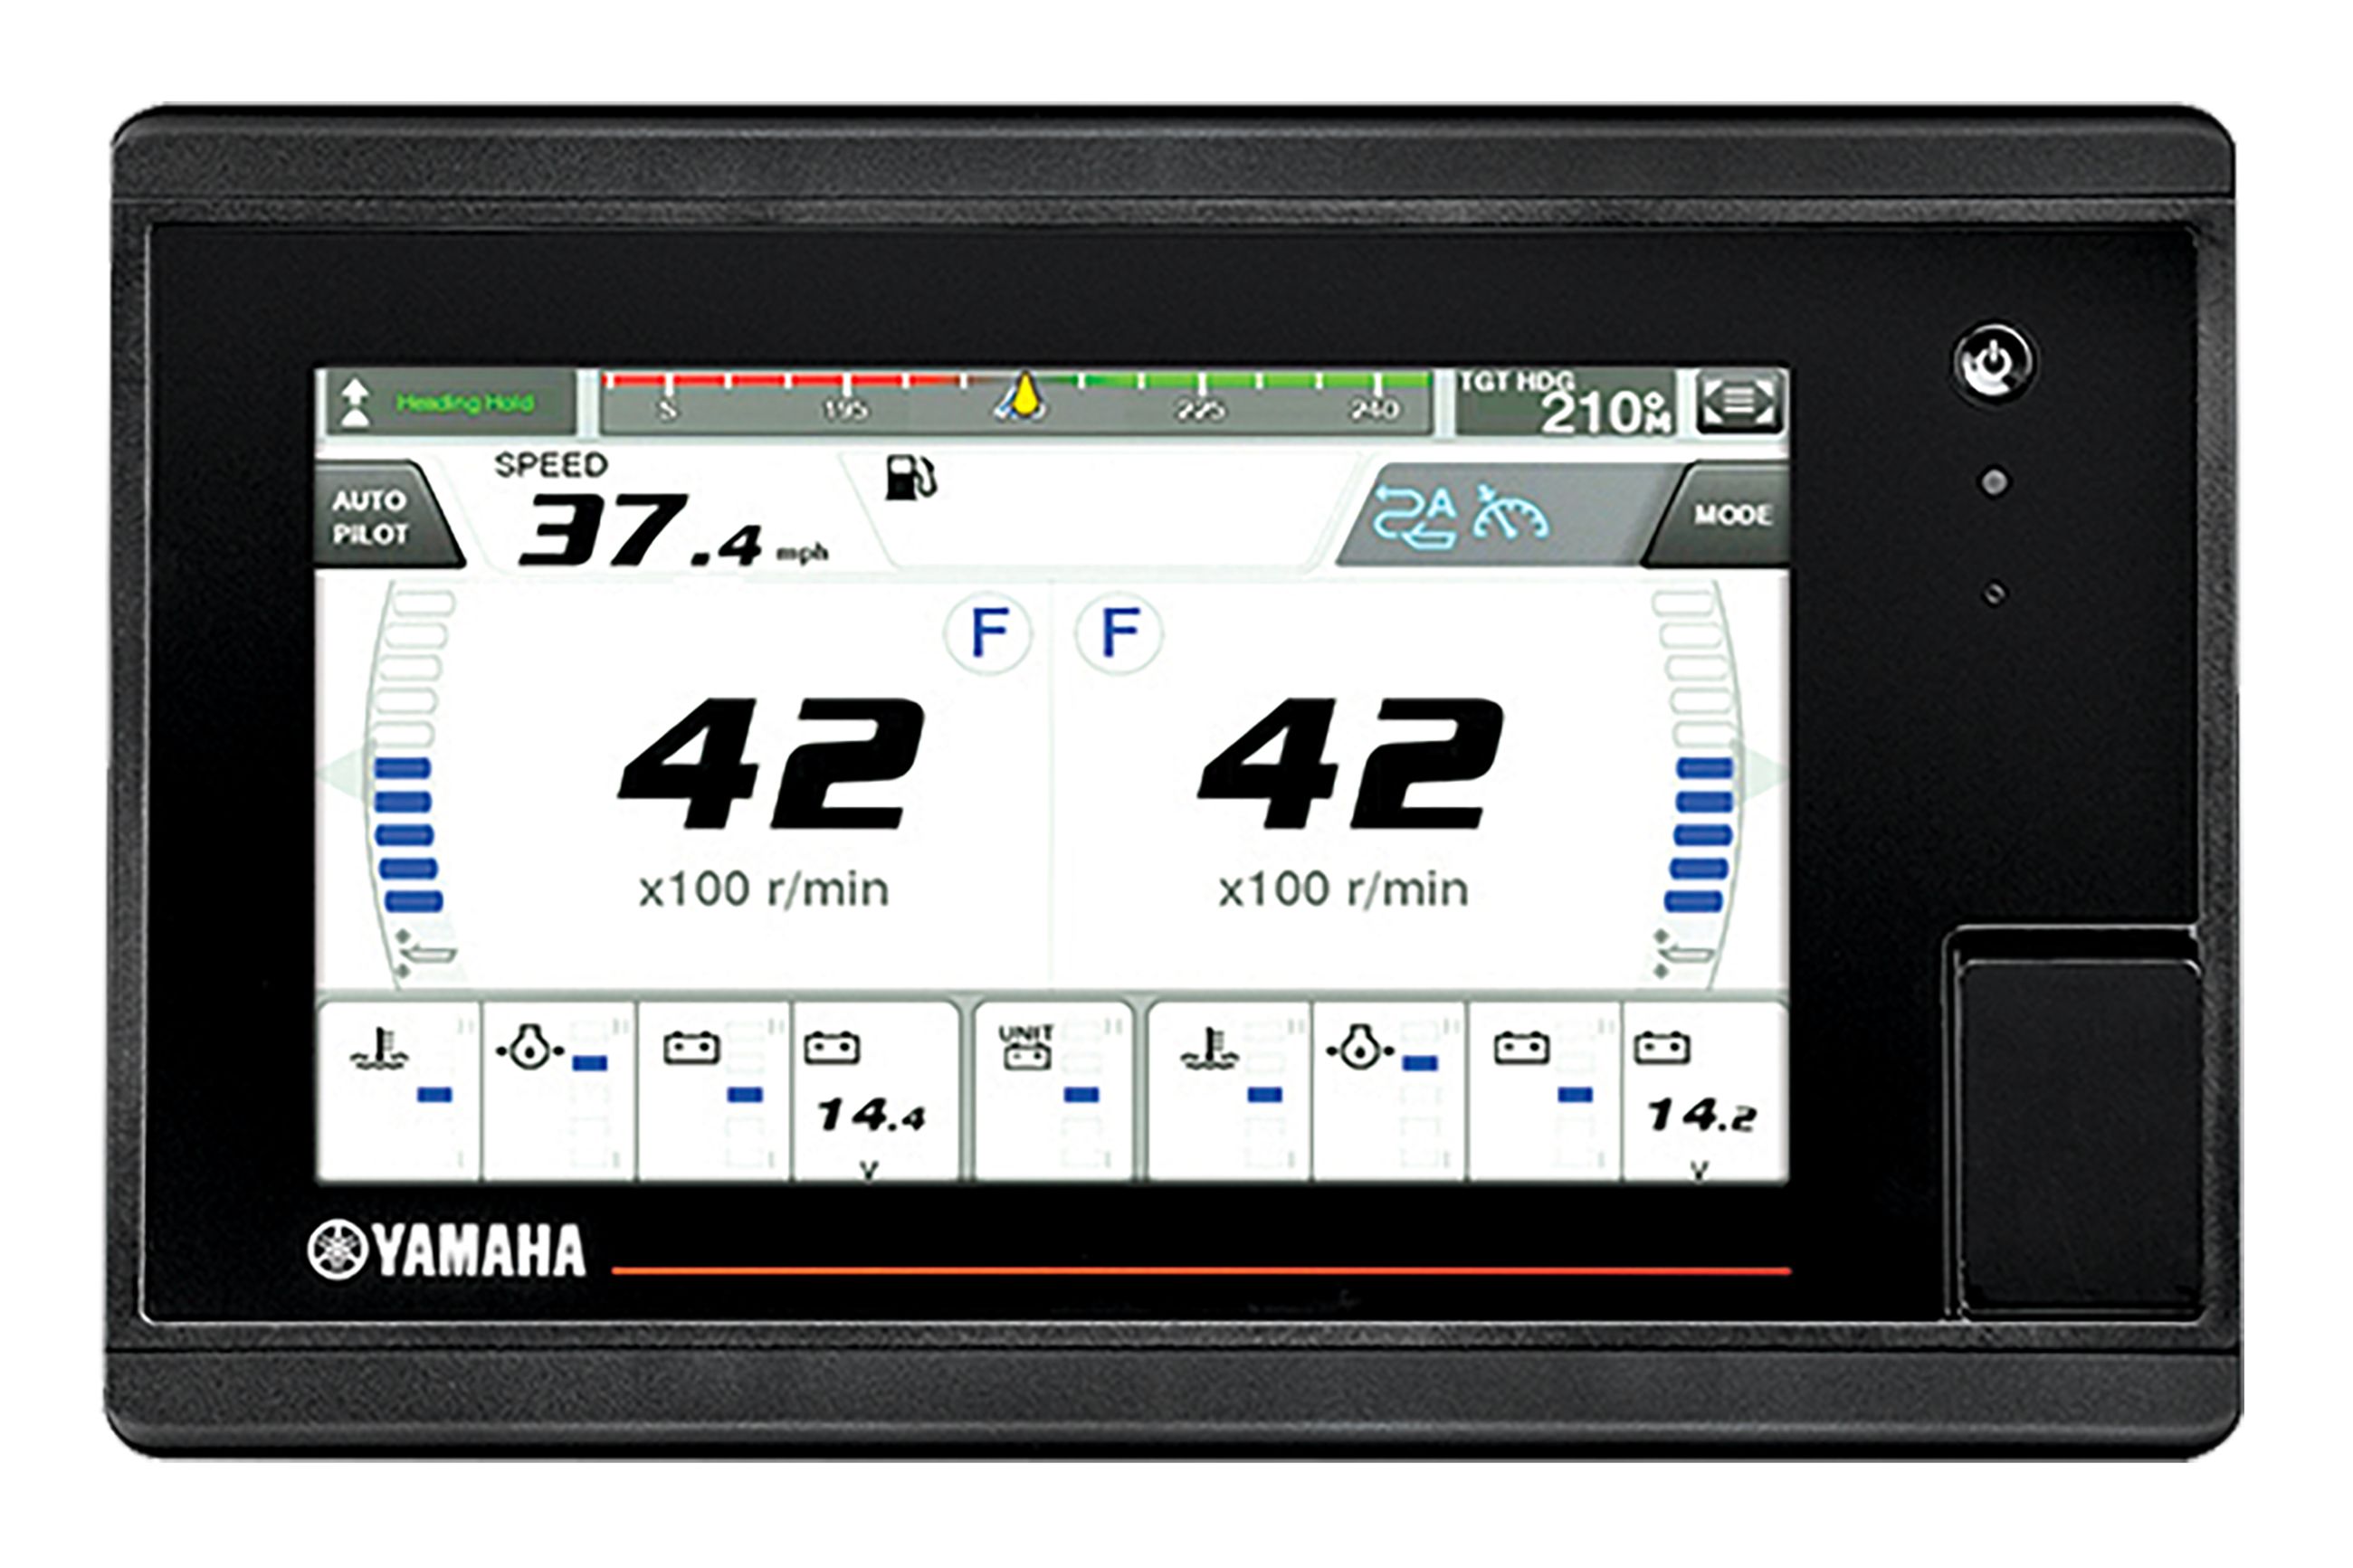 Detail image of Yamaha Command Link Plus CL7 Touchscreen Display